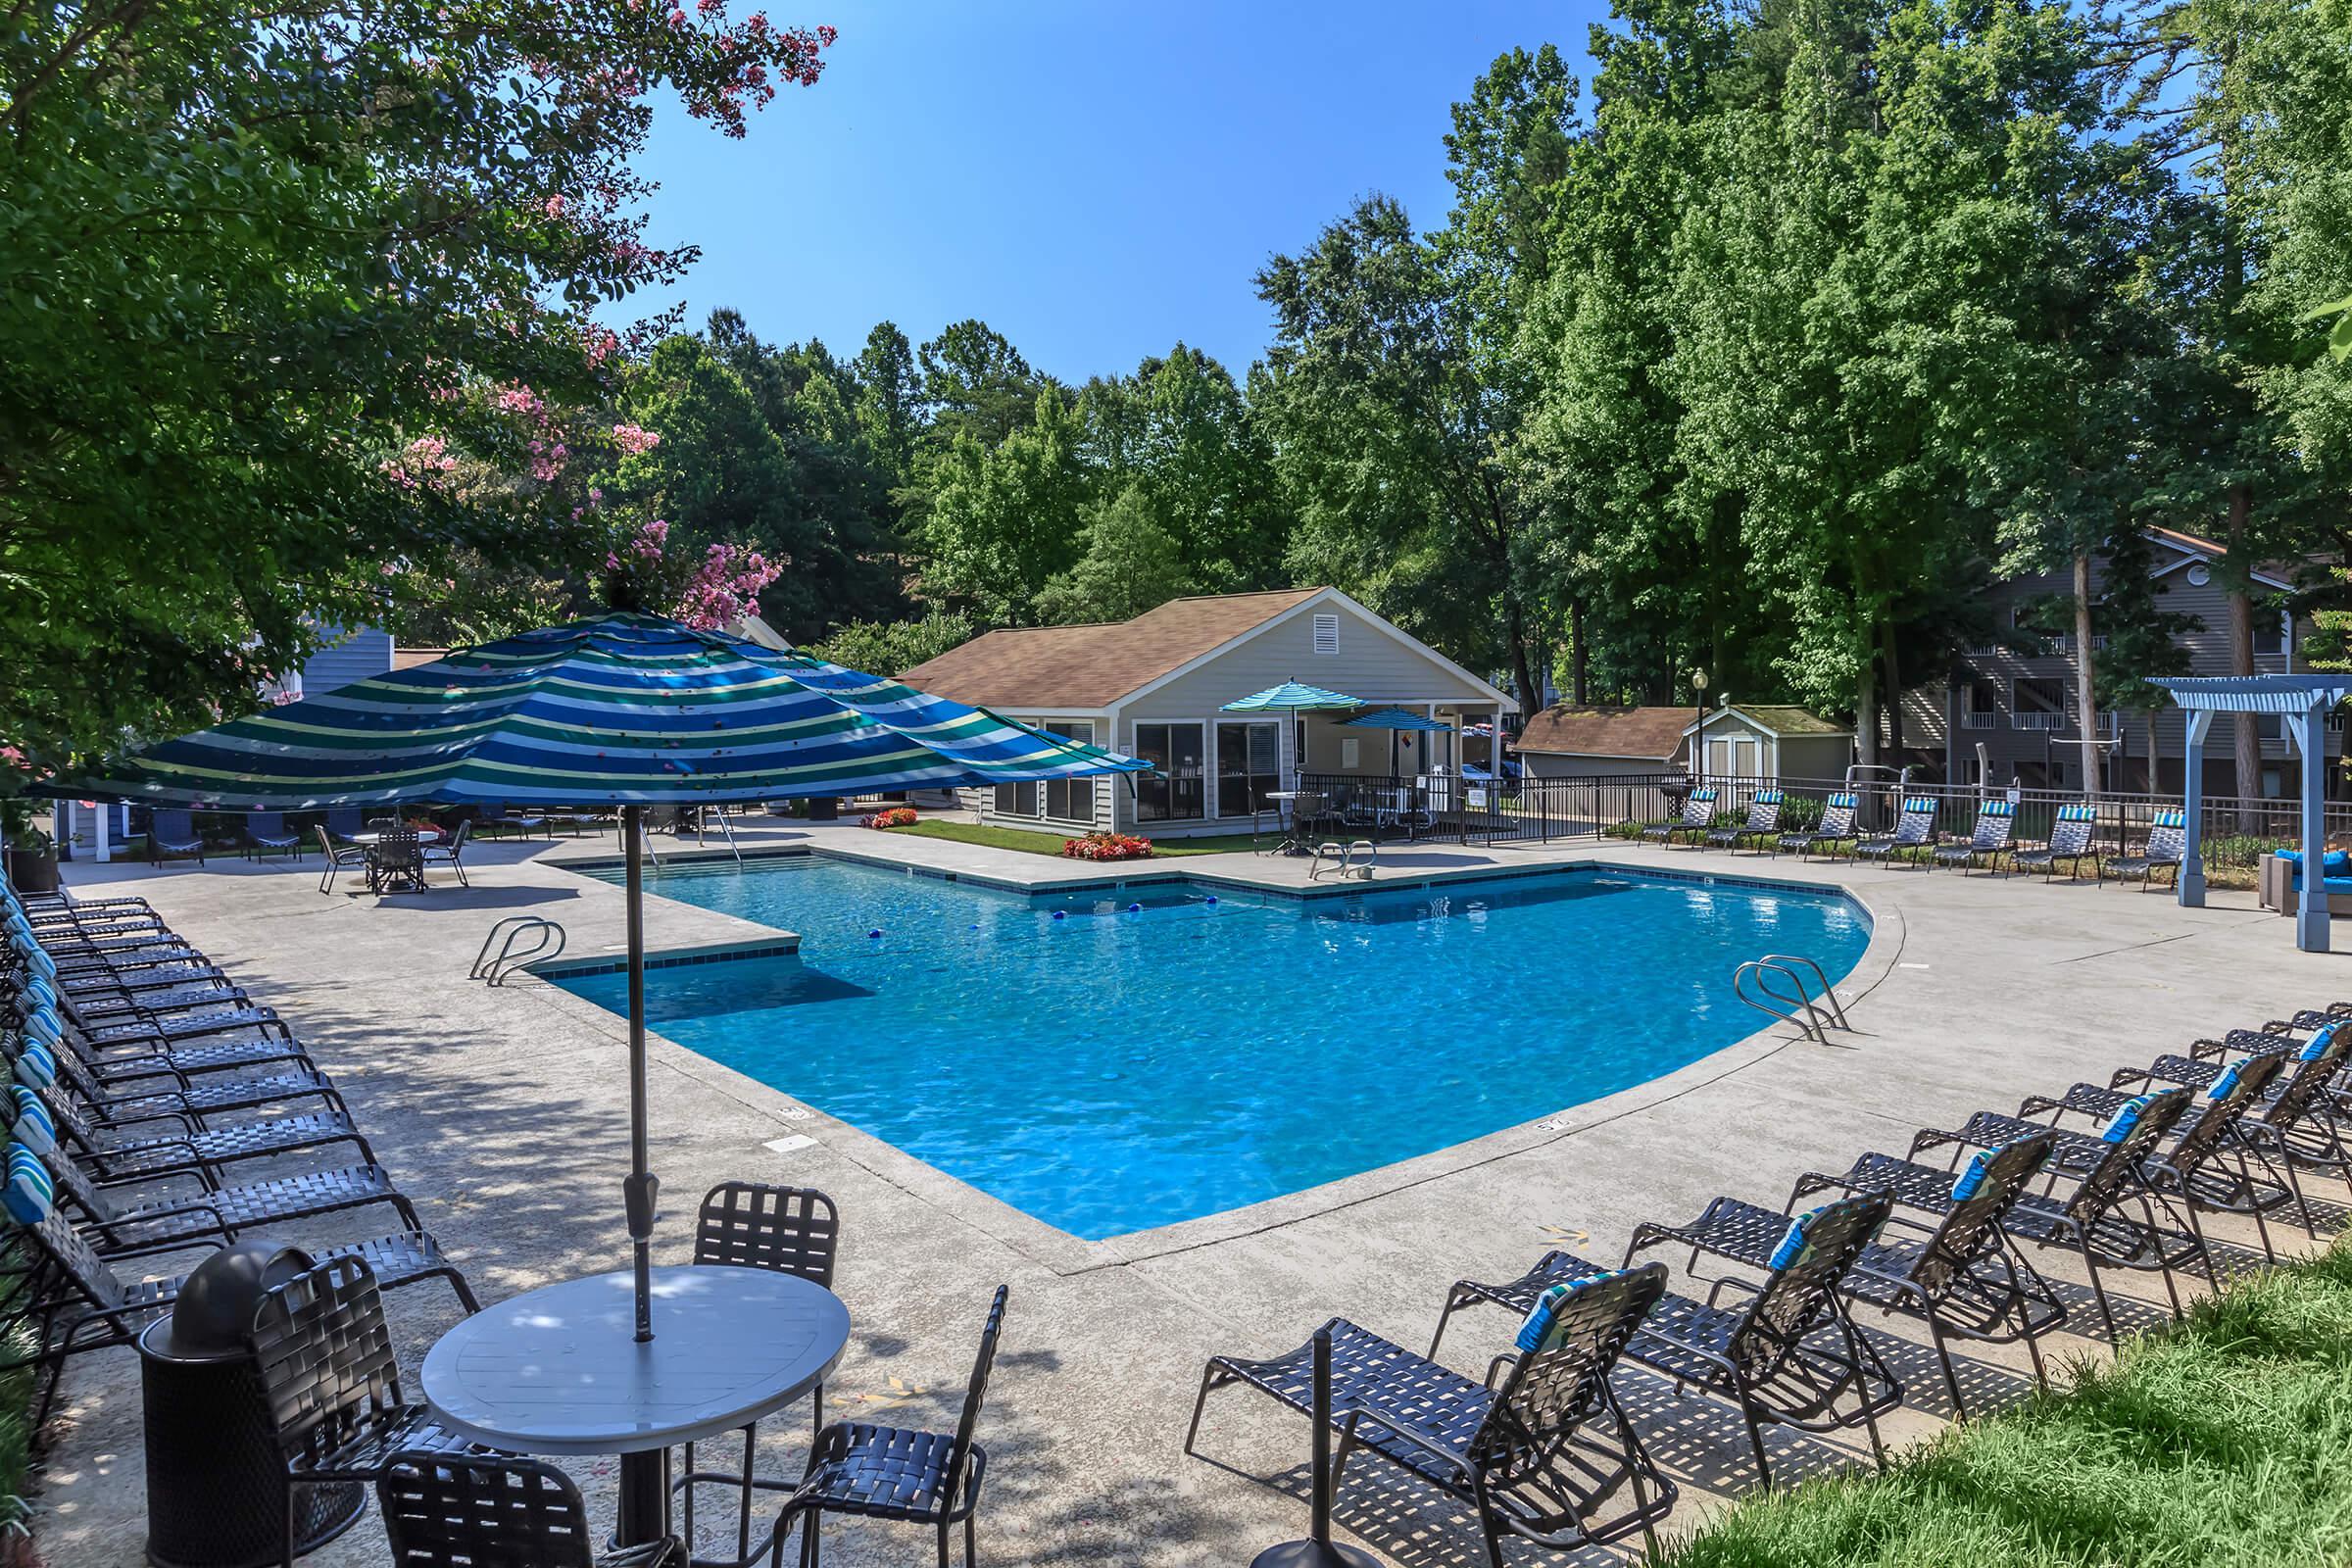 Relaxing Sundeck with Free Wi-Fi - Huntsview Apartments - Greensboro - North Carolina